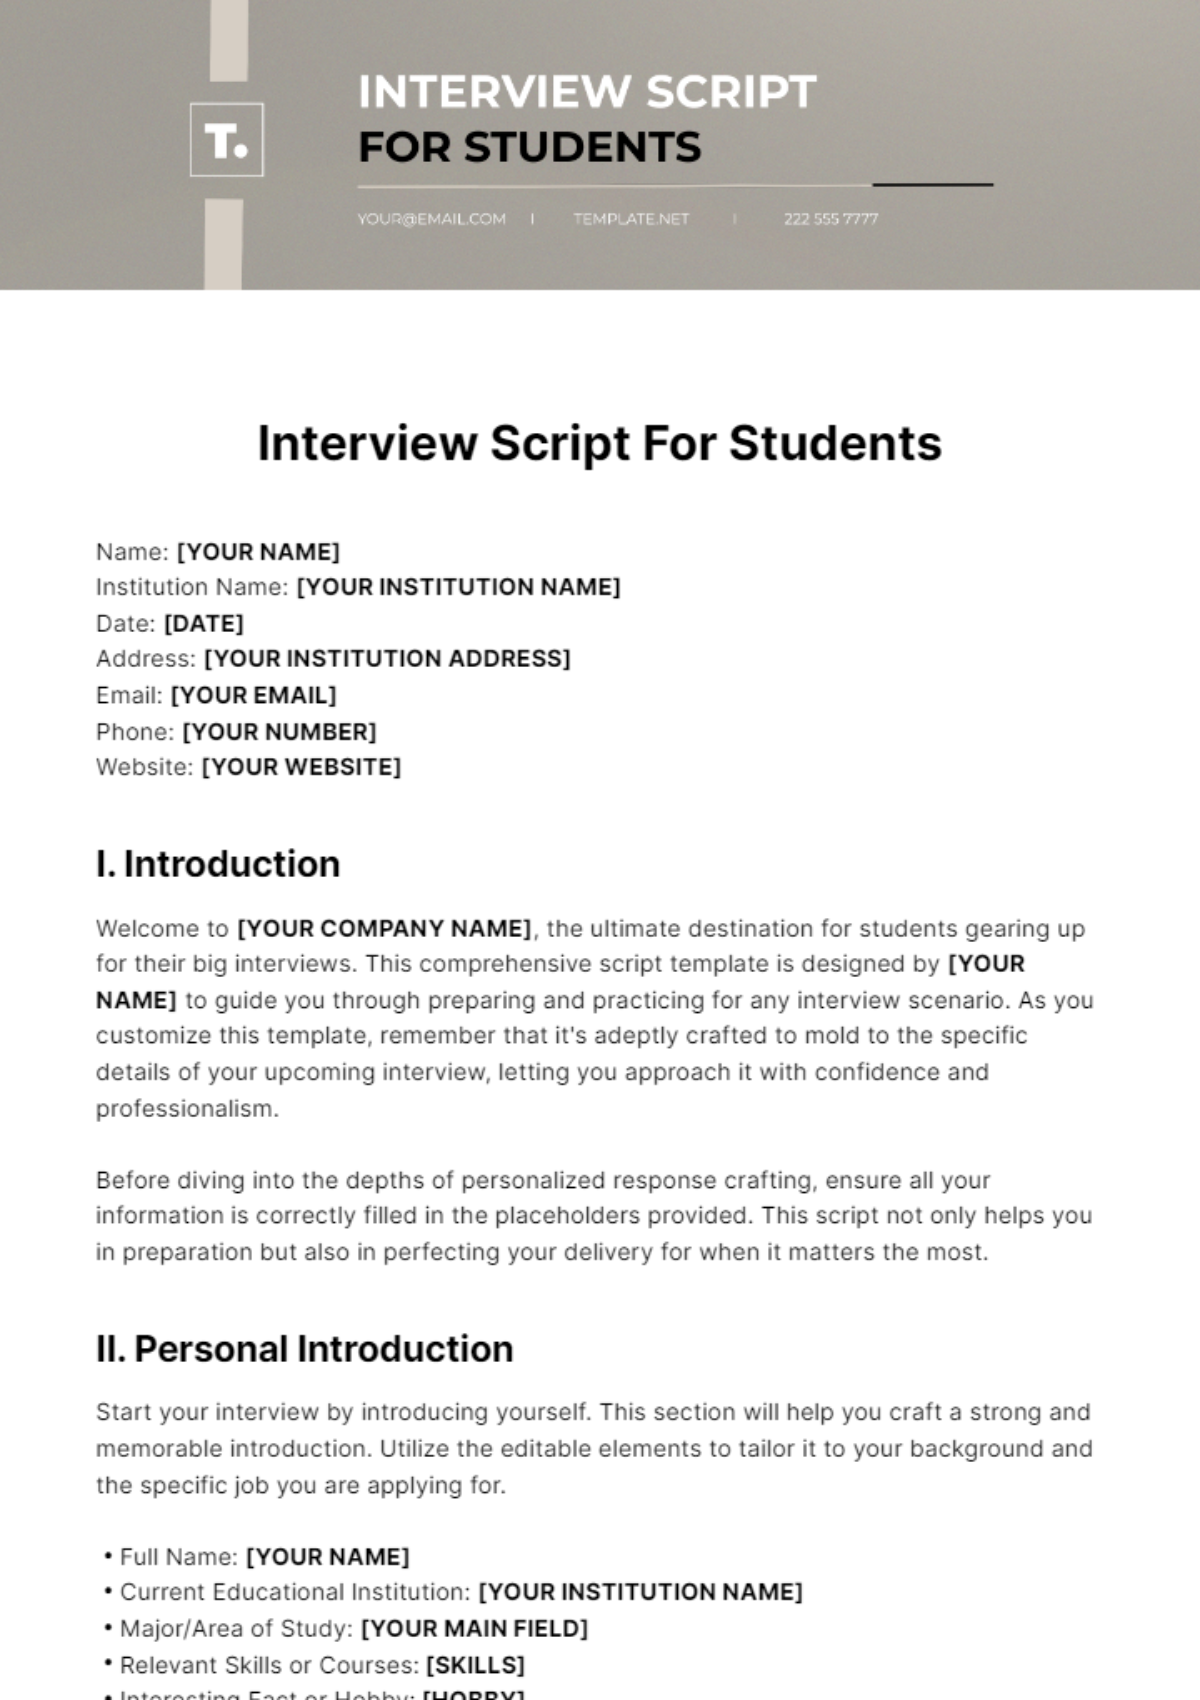 Interview Script For Students Template